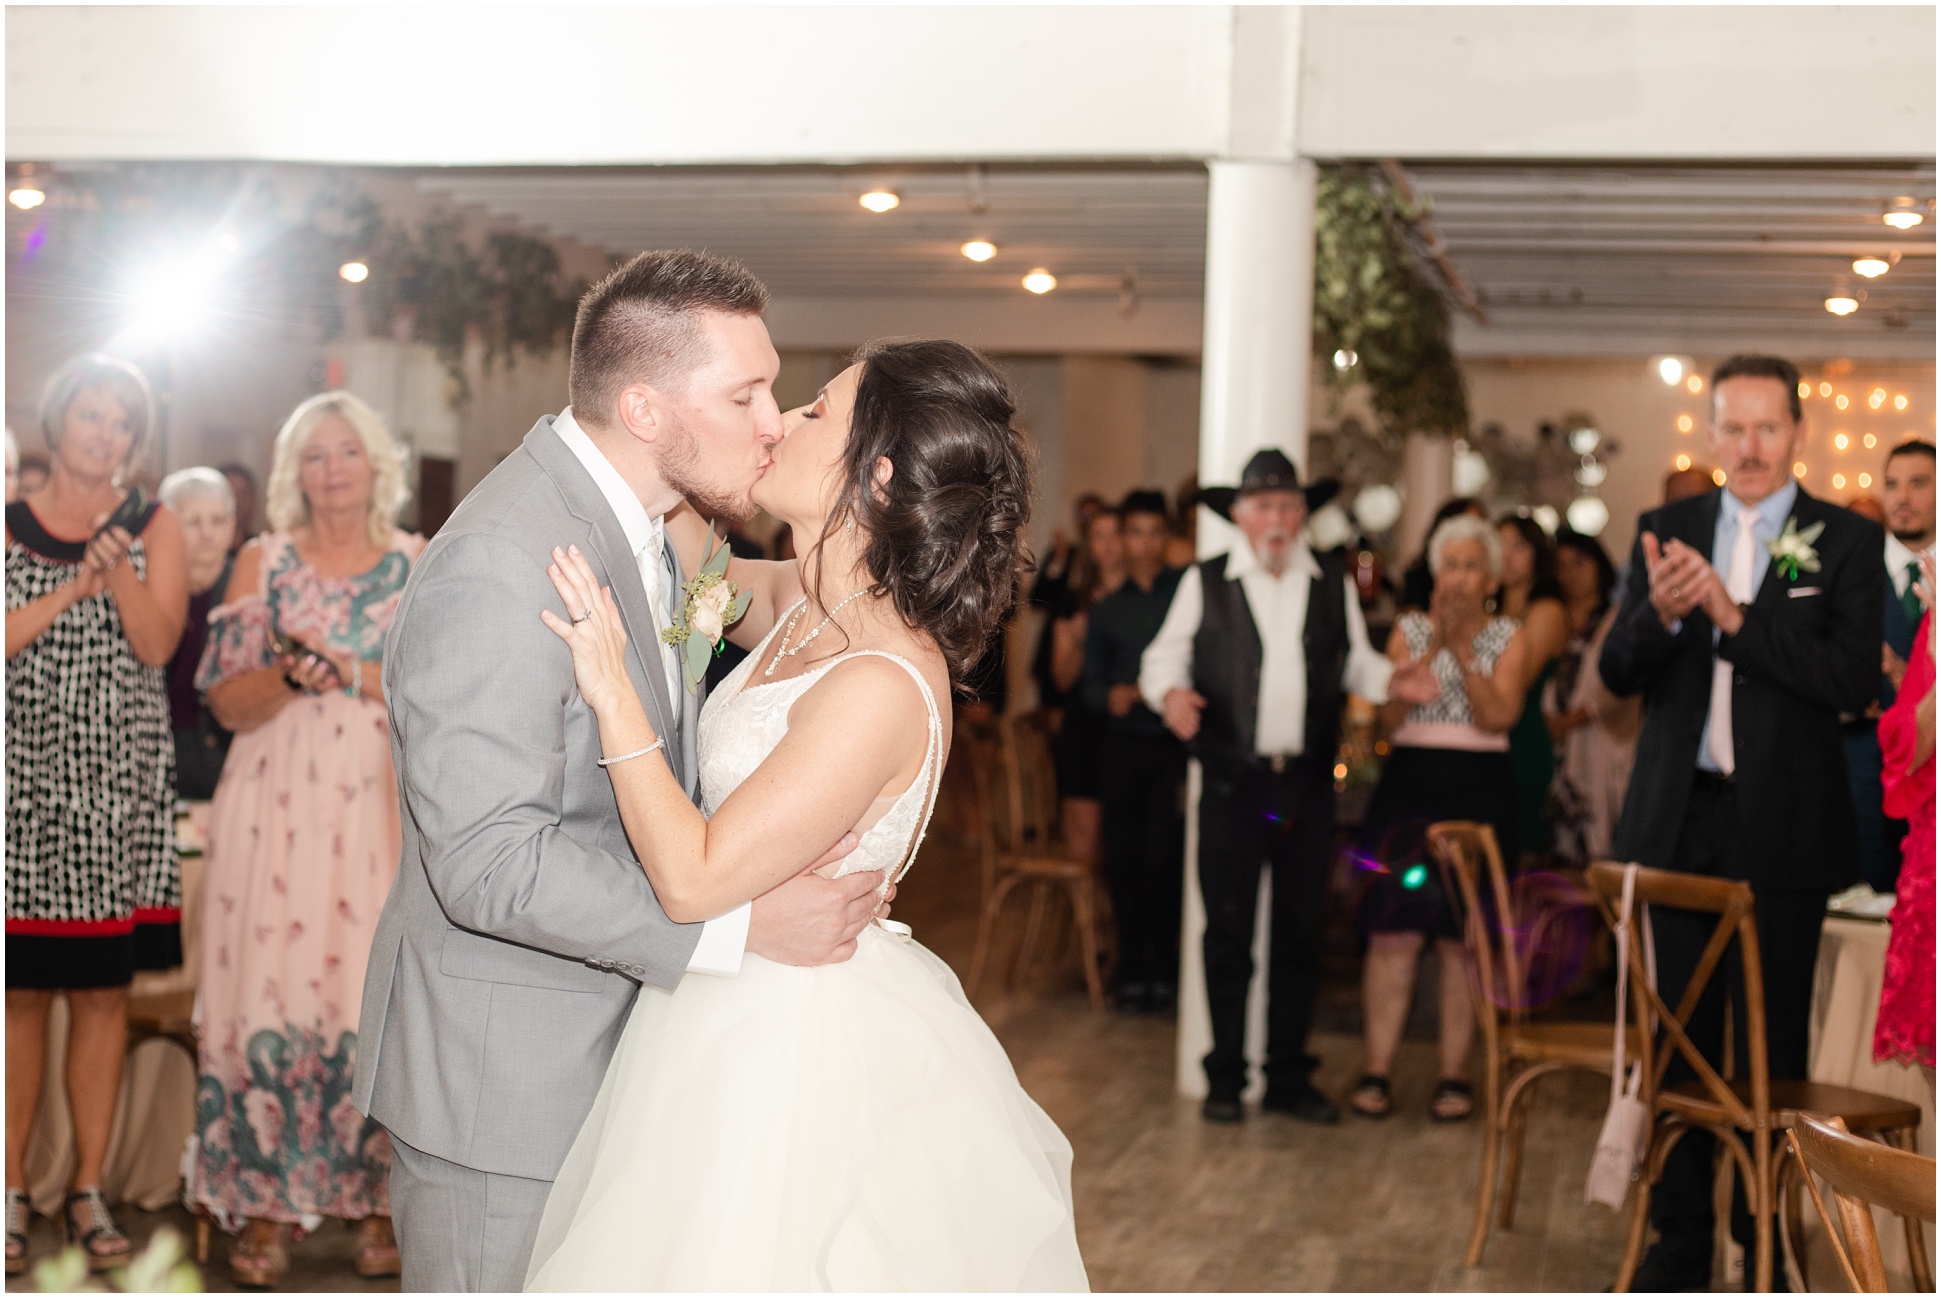 Bride and Groom kissing on dance floor at the reception 